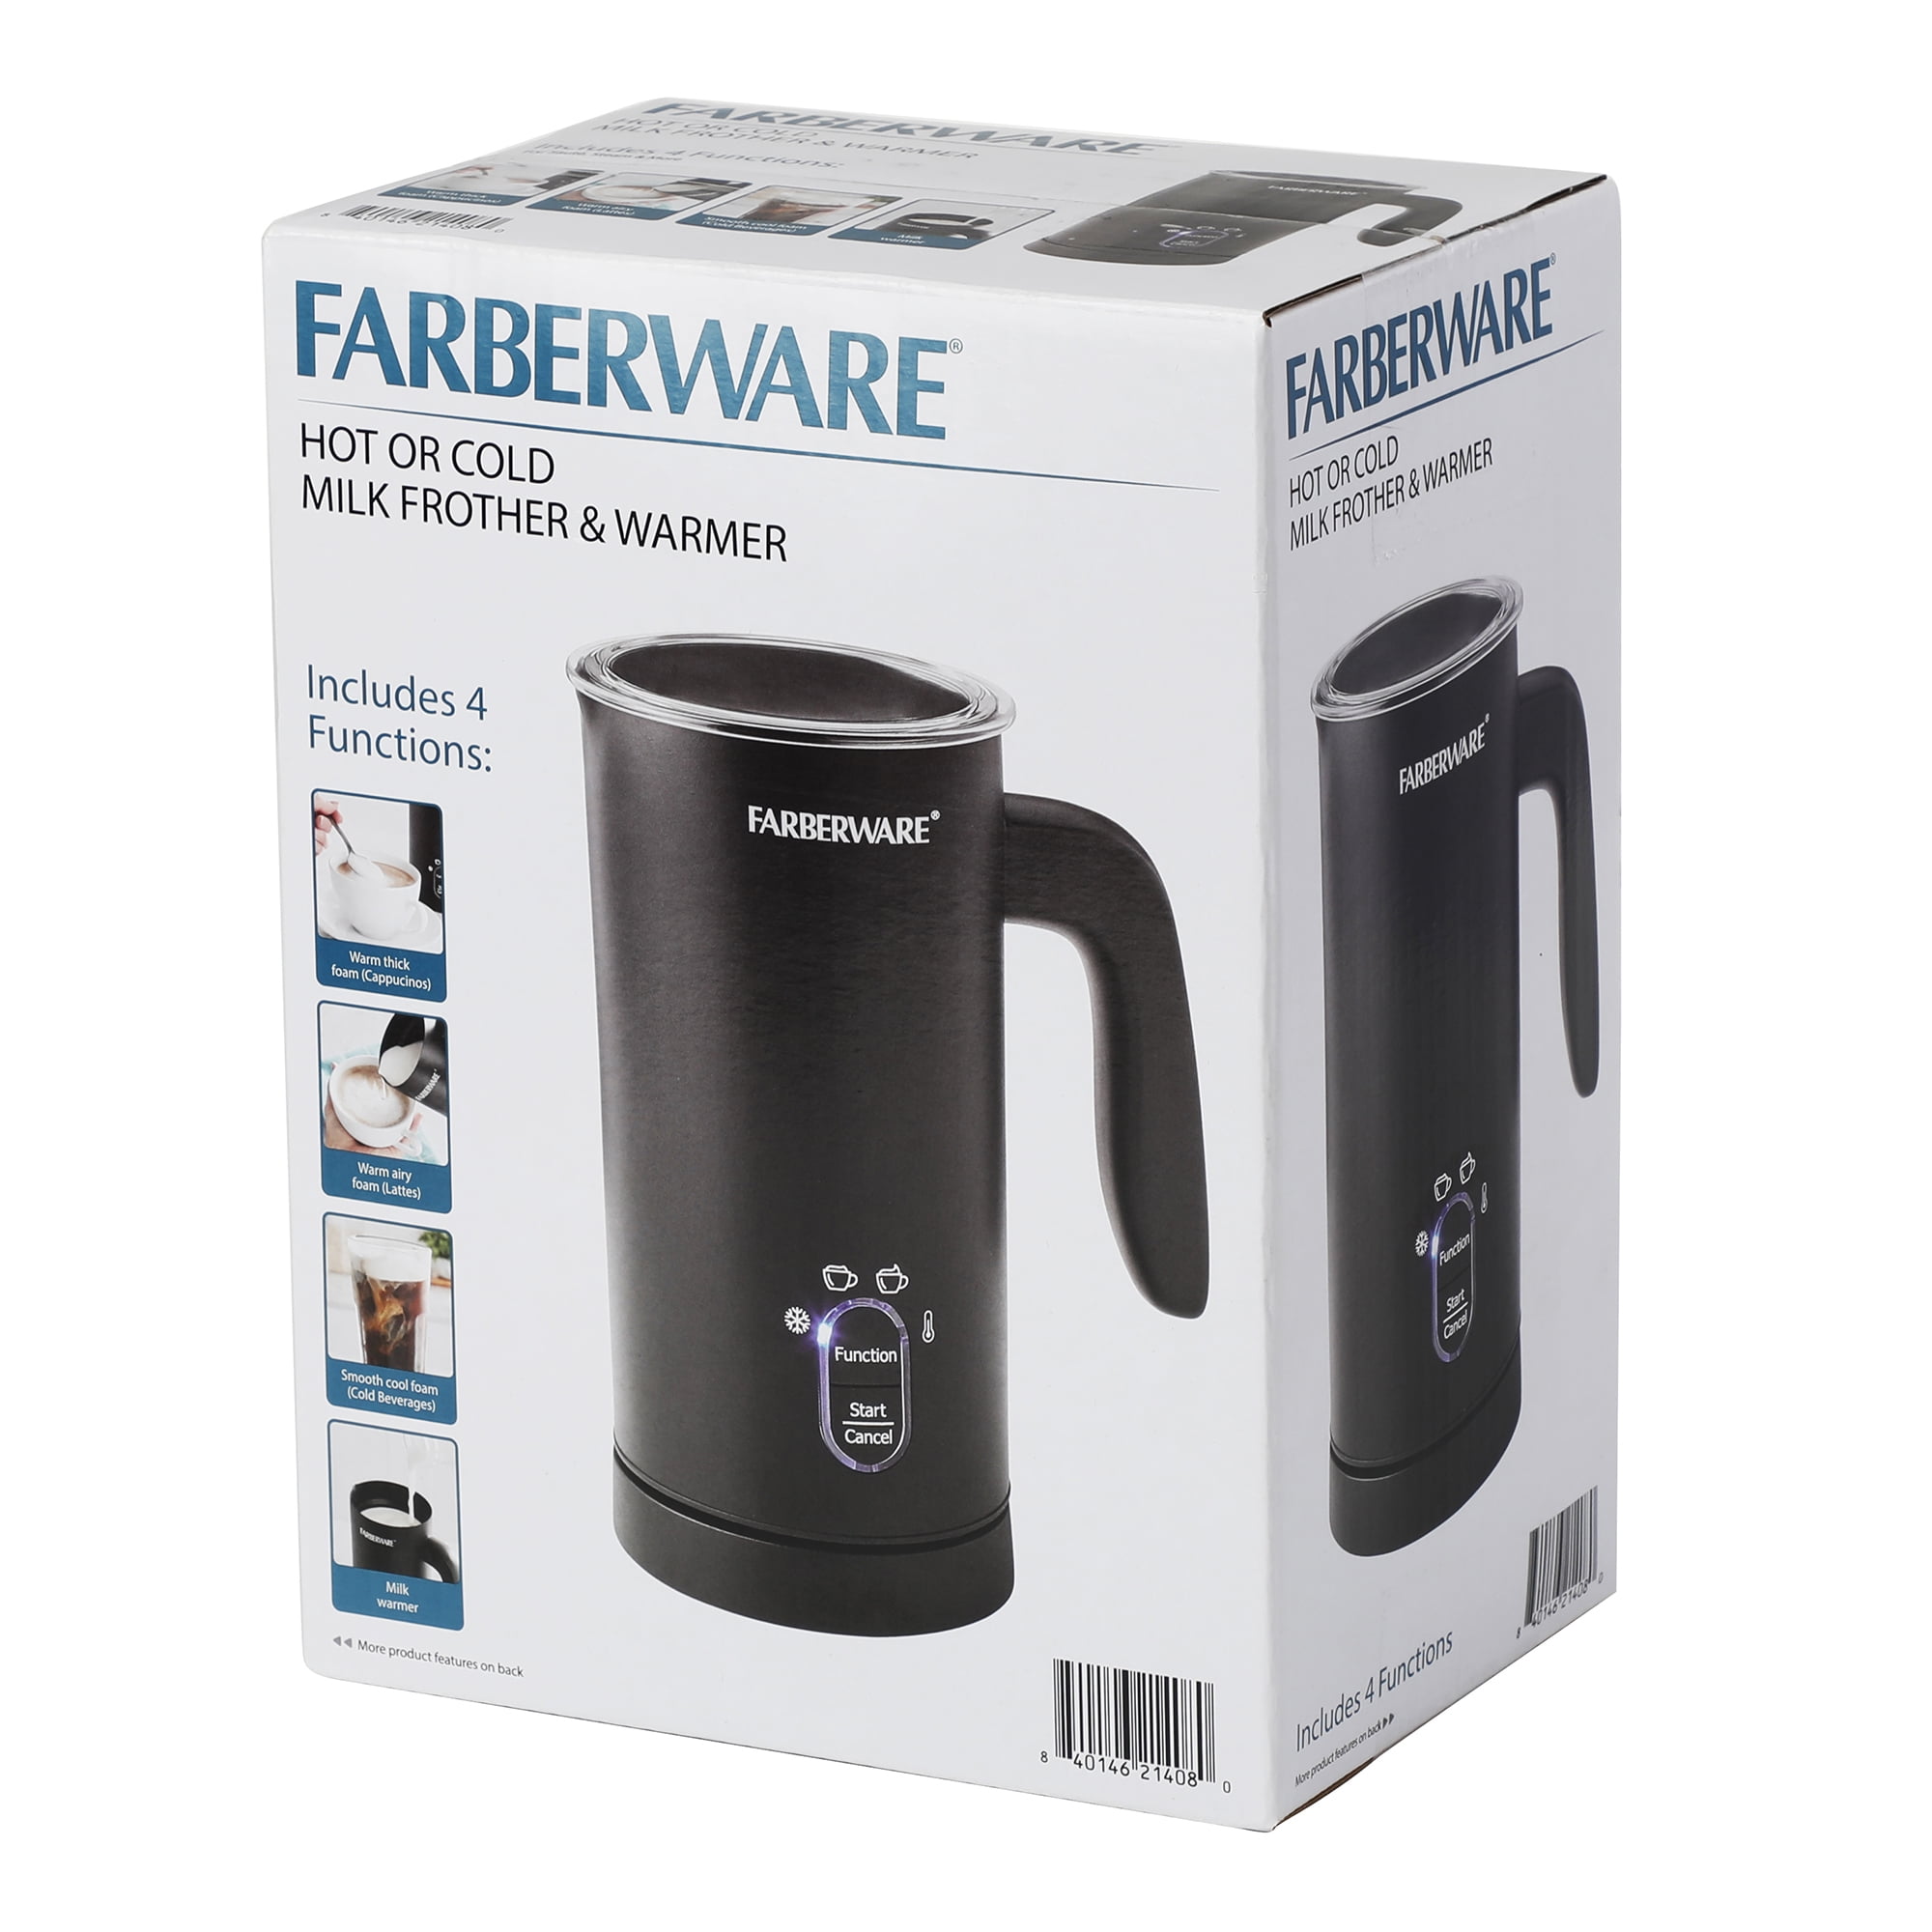 REVIEW FARBERWARE Espresso Maker MILK Frother How To Make